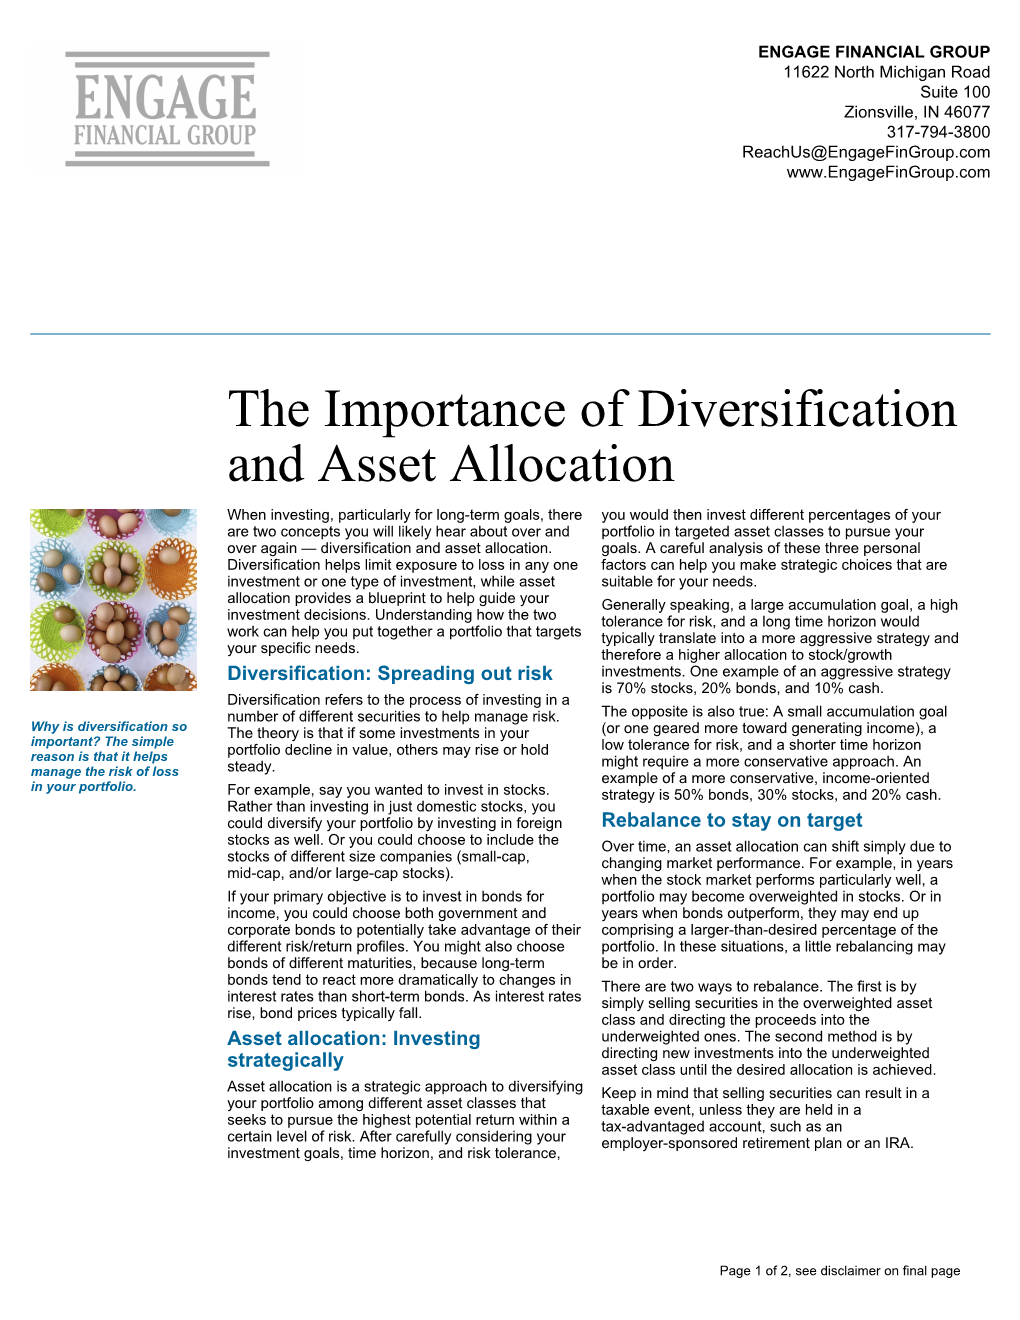 The Importance of Diversification and Asset Allocation